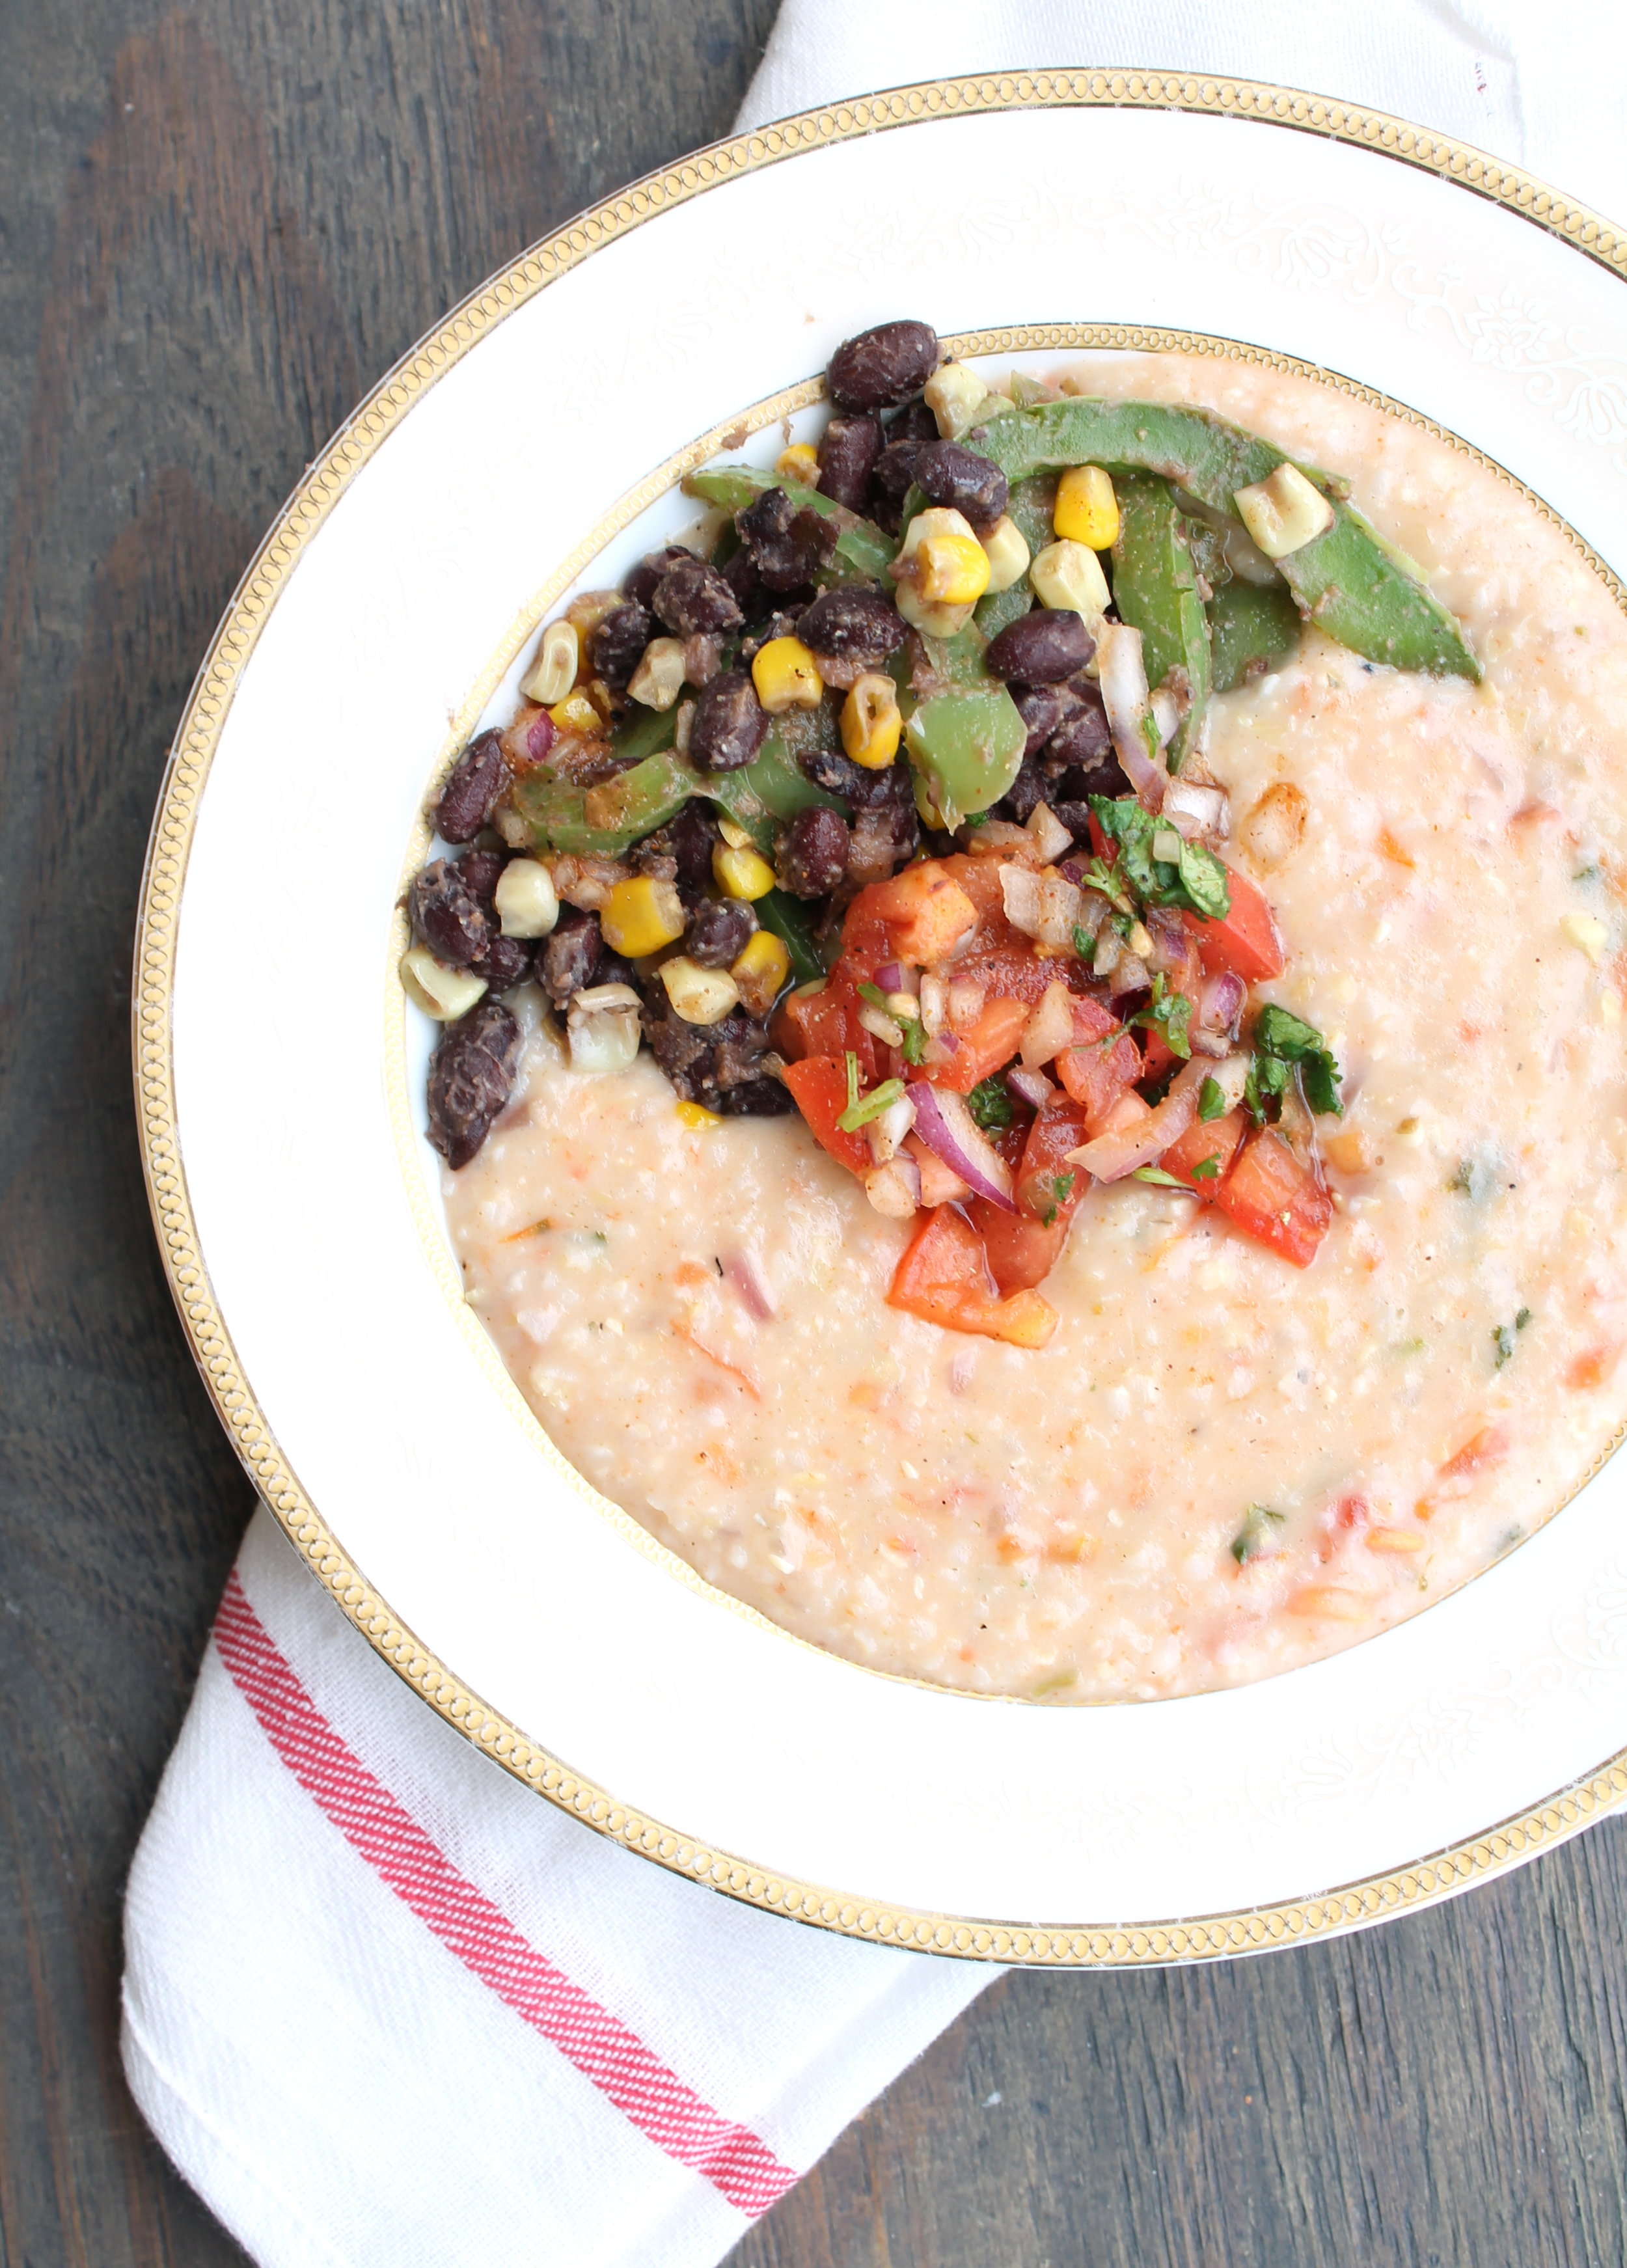 Mexican-Style Grits is one-pot comforting meal packed with Mexican flavors. It is naturally gluten-free and vegan friendly.